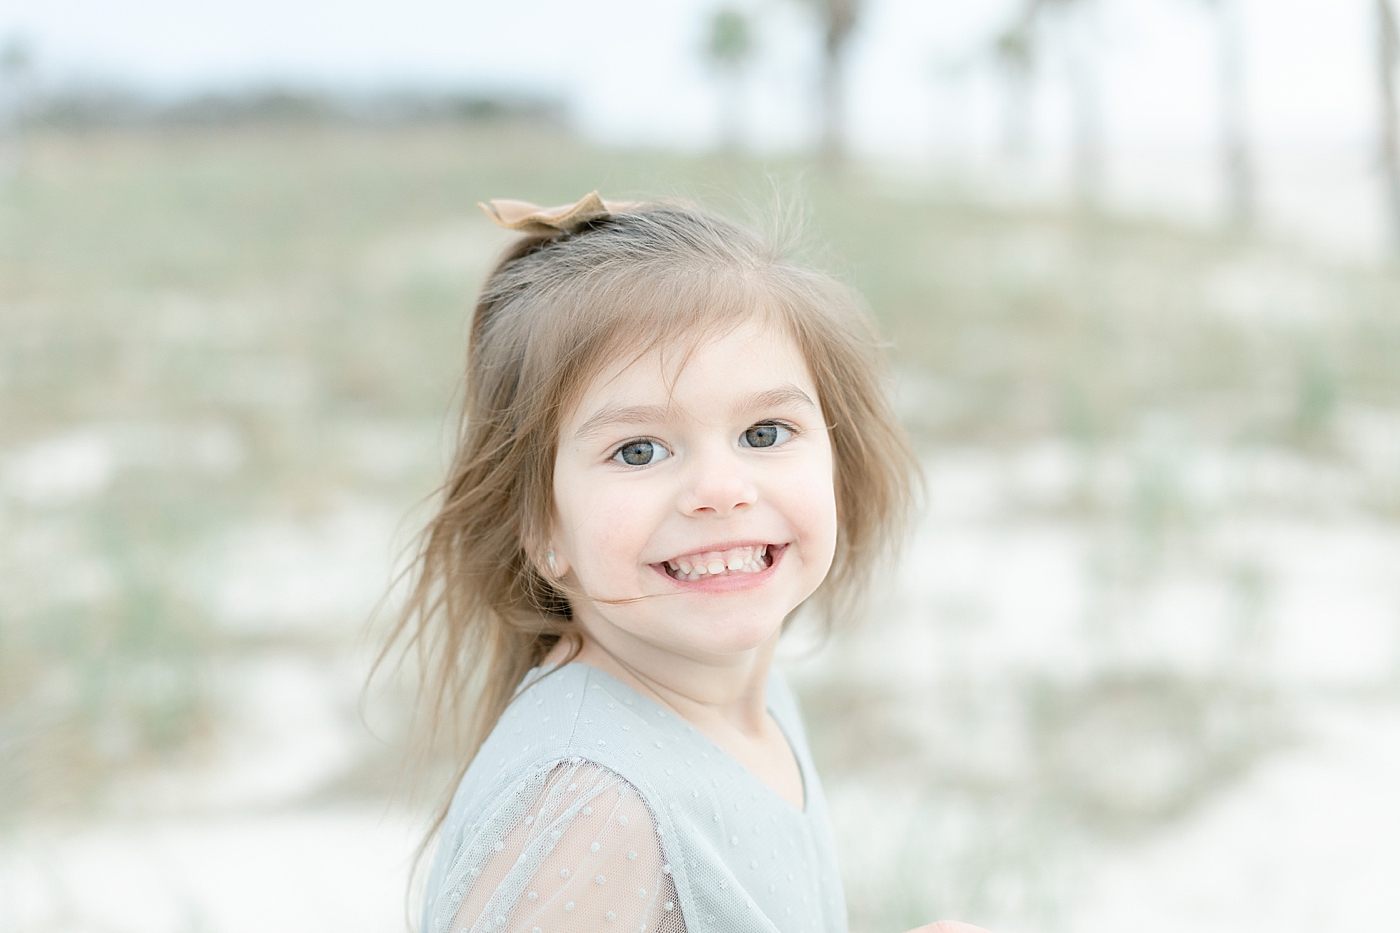 Little girl in blue dress smiling on the beach | Photo by Little Sunshine Photography